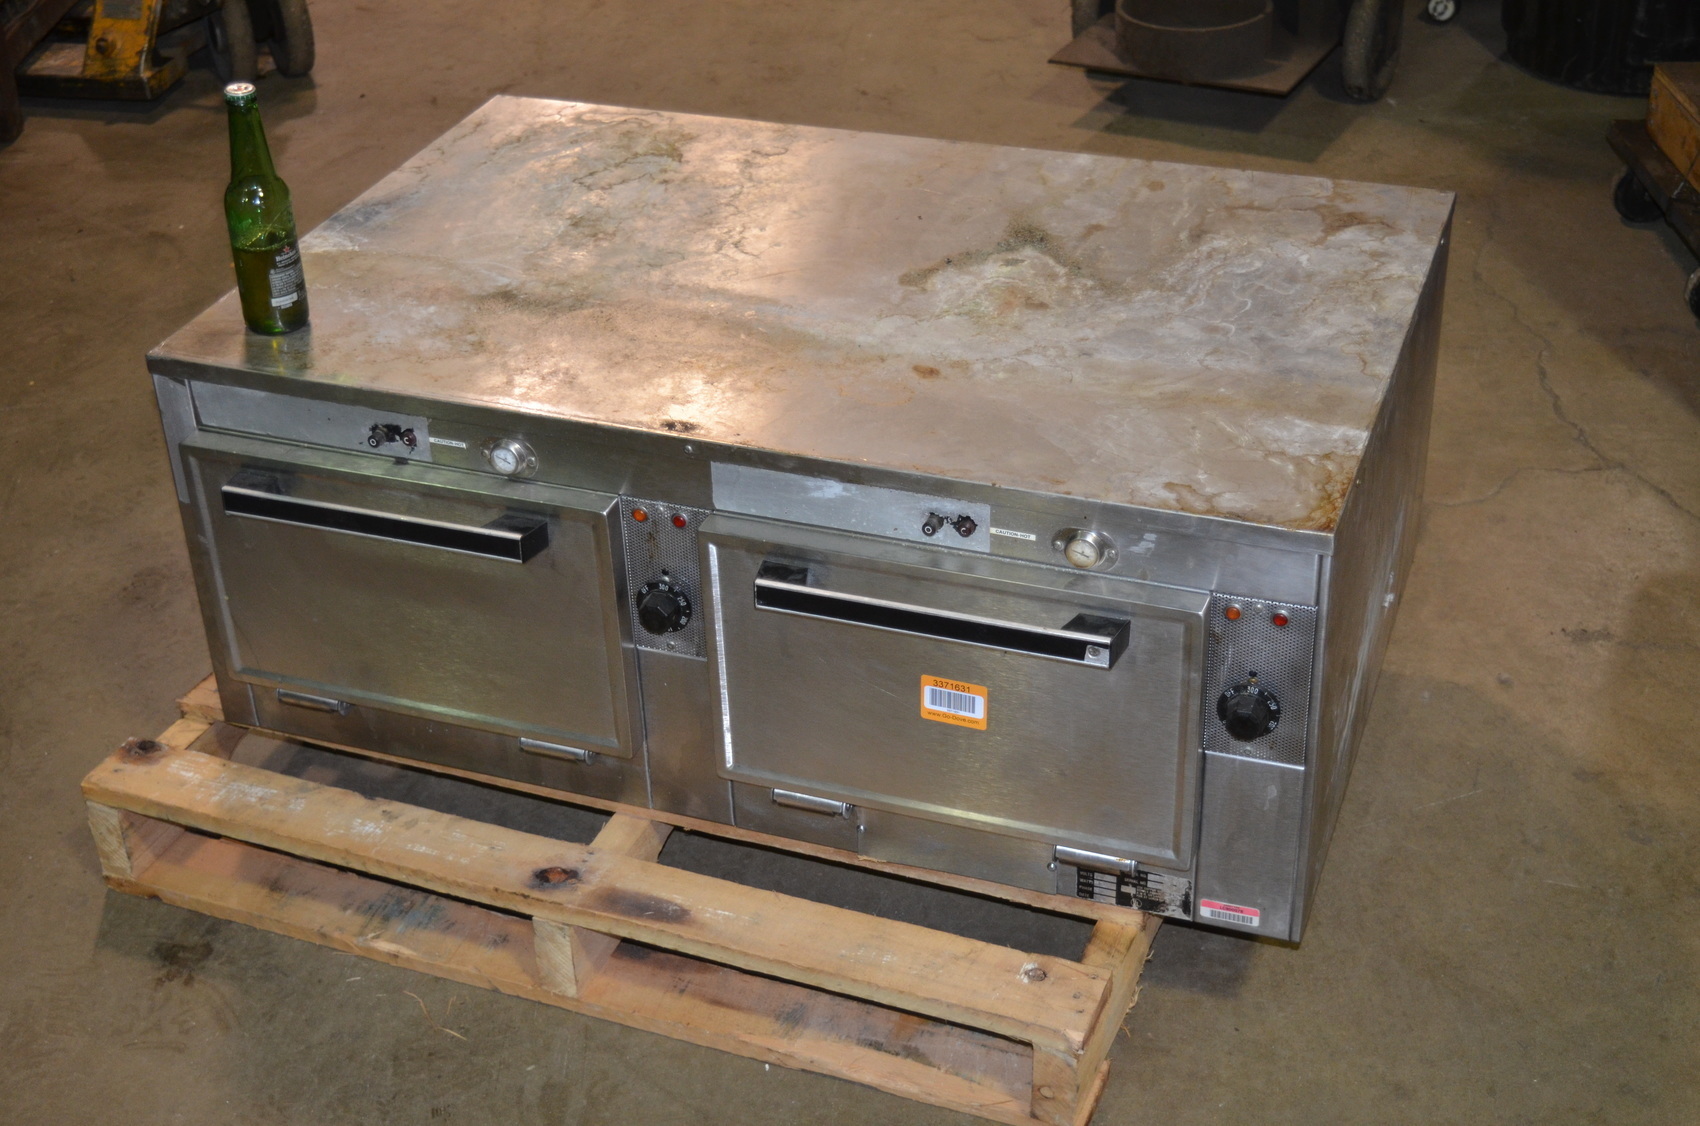 Seco S-2602-0 double food warmer oven;300 C stainless